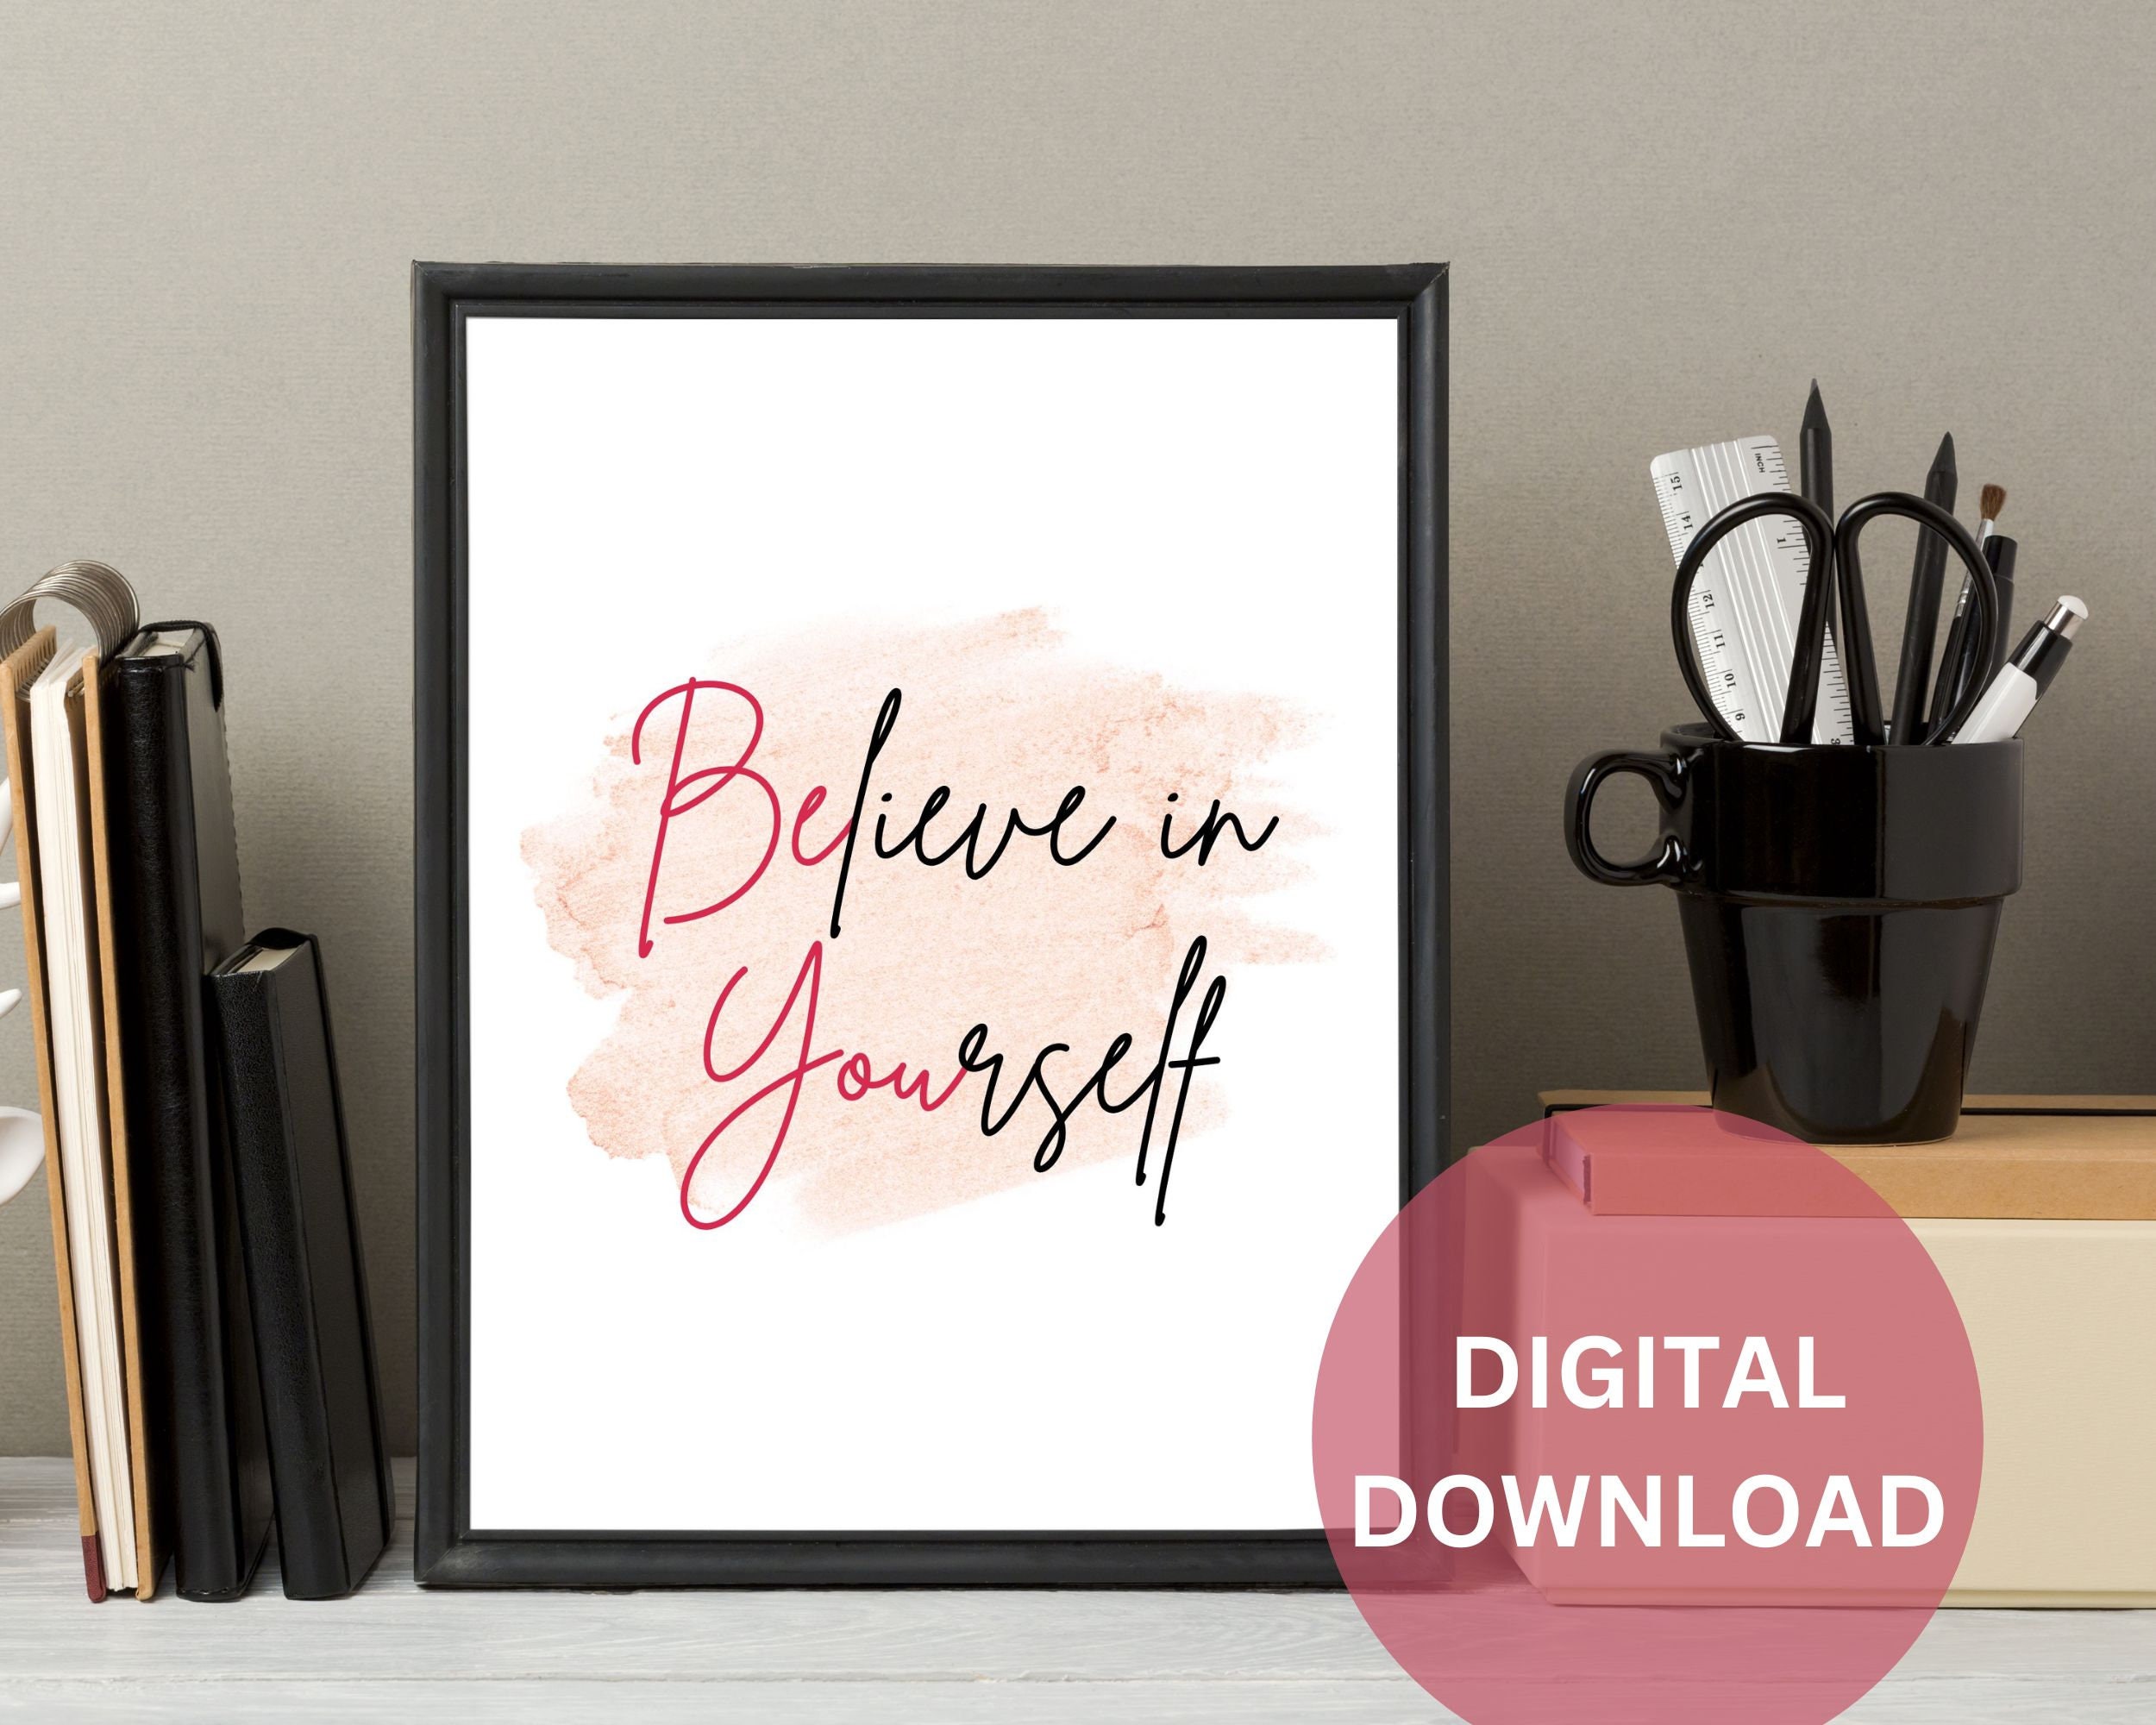 Believe Etsy Yourself Print in -